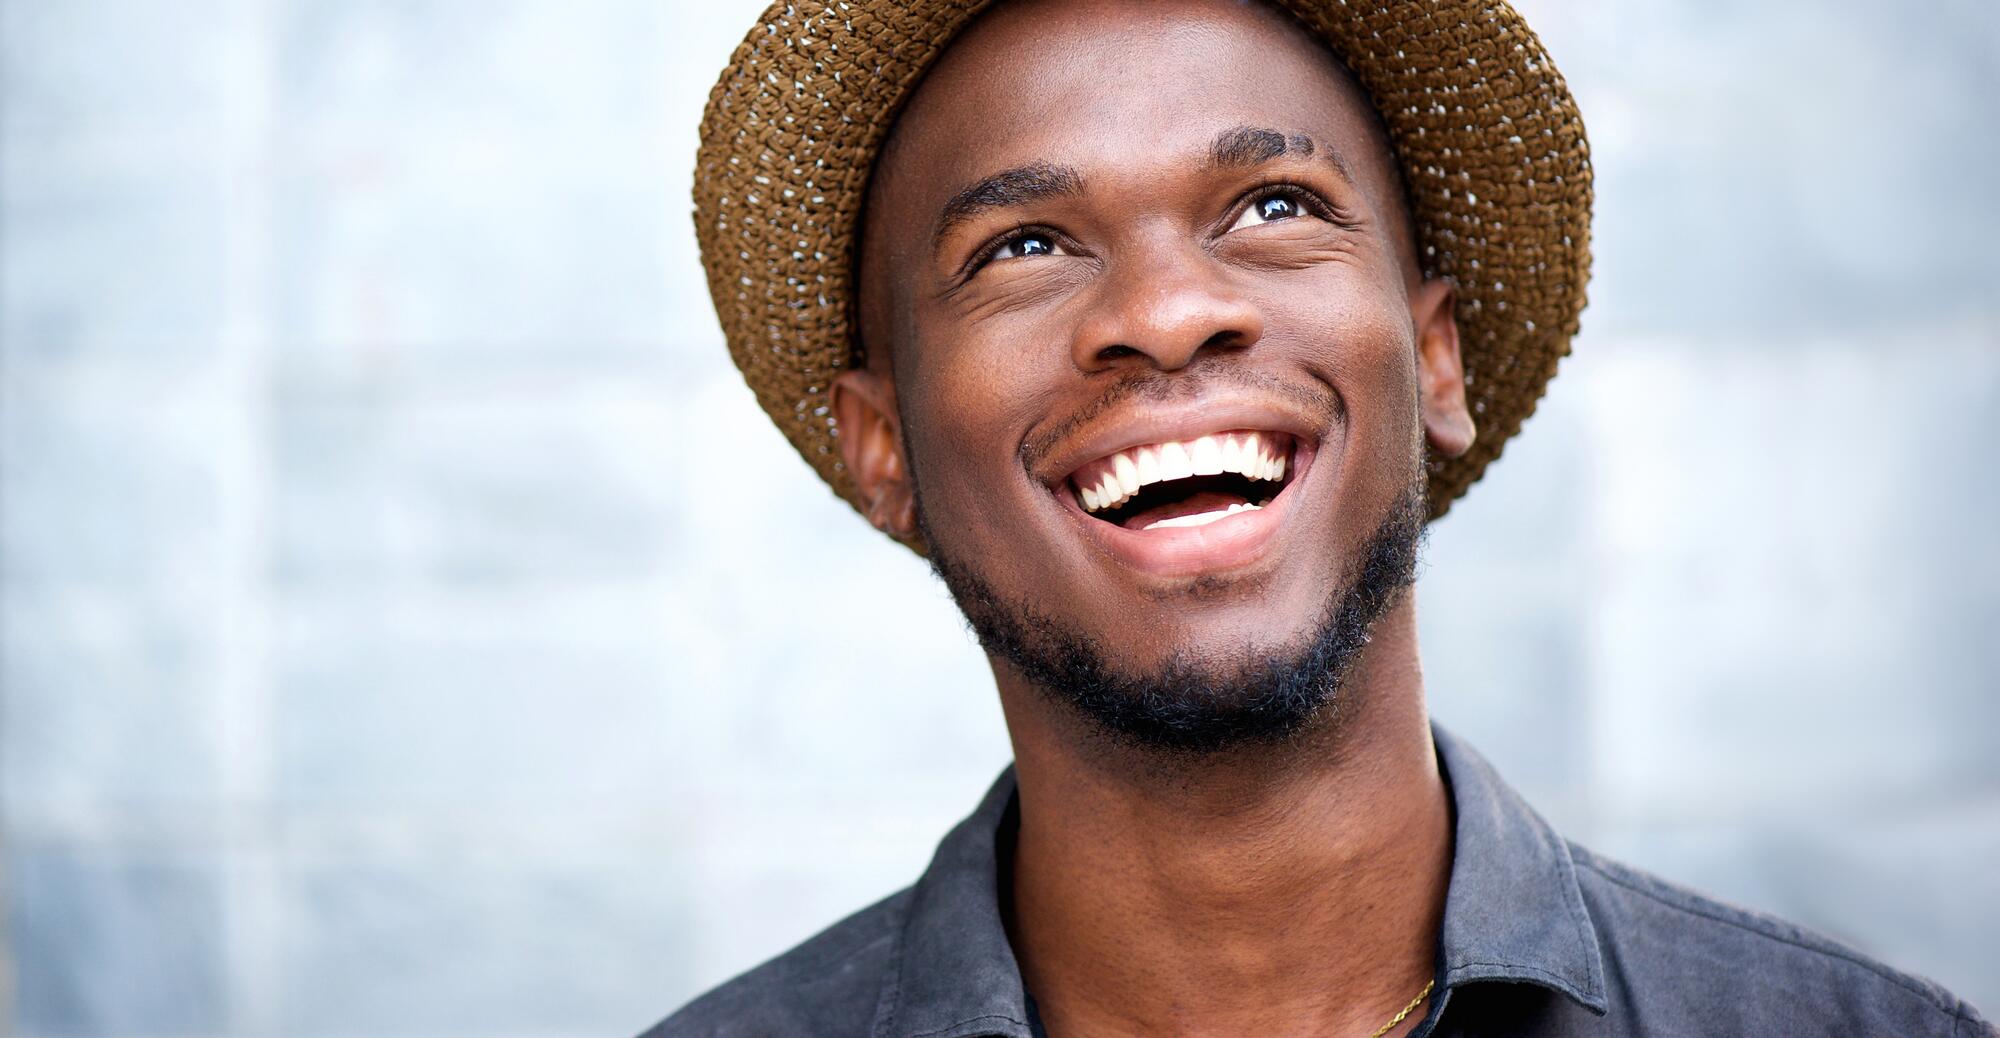 OC_YOUNG_MAN_HAT_SMILE_SHUTTERSTOCK_253202191